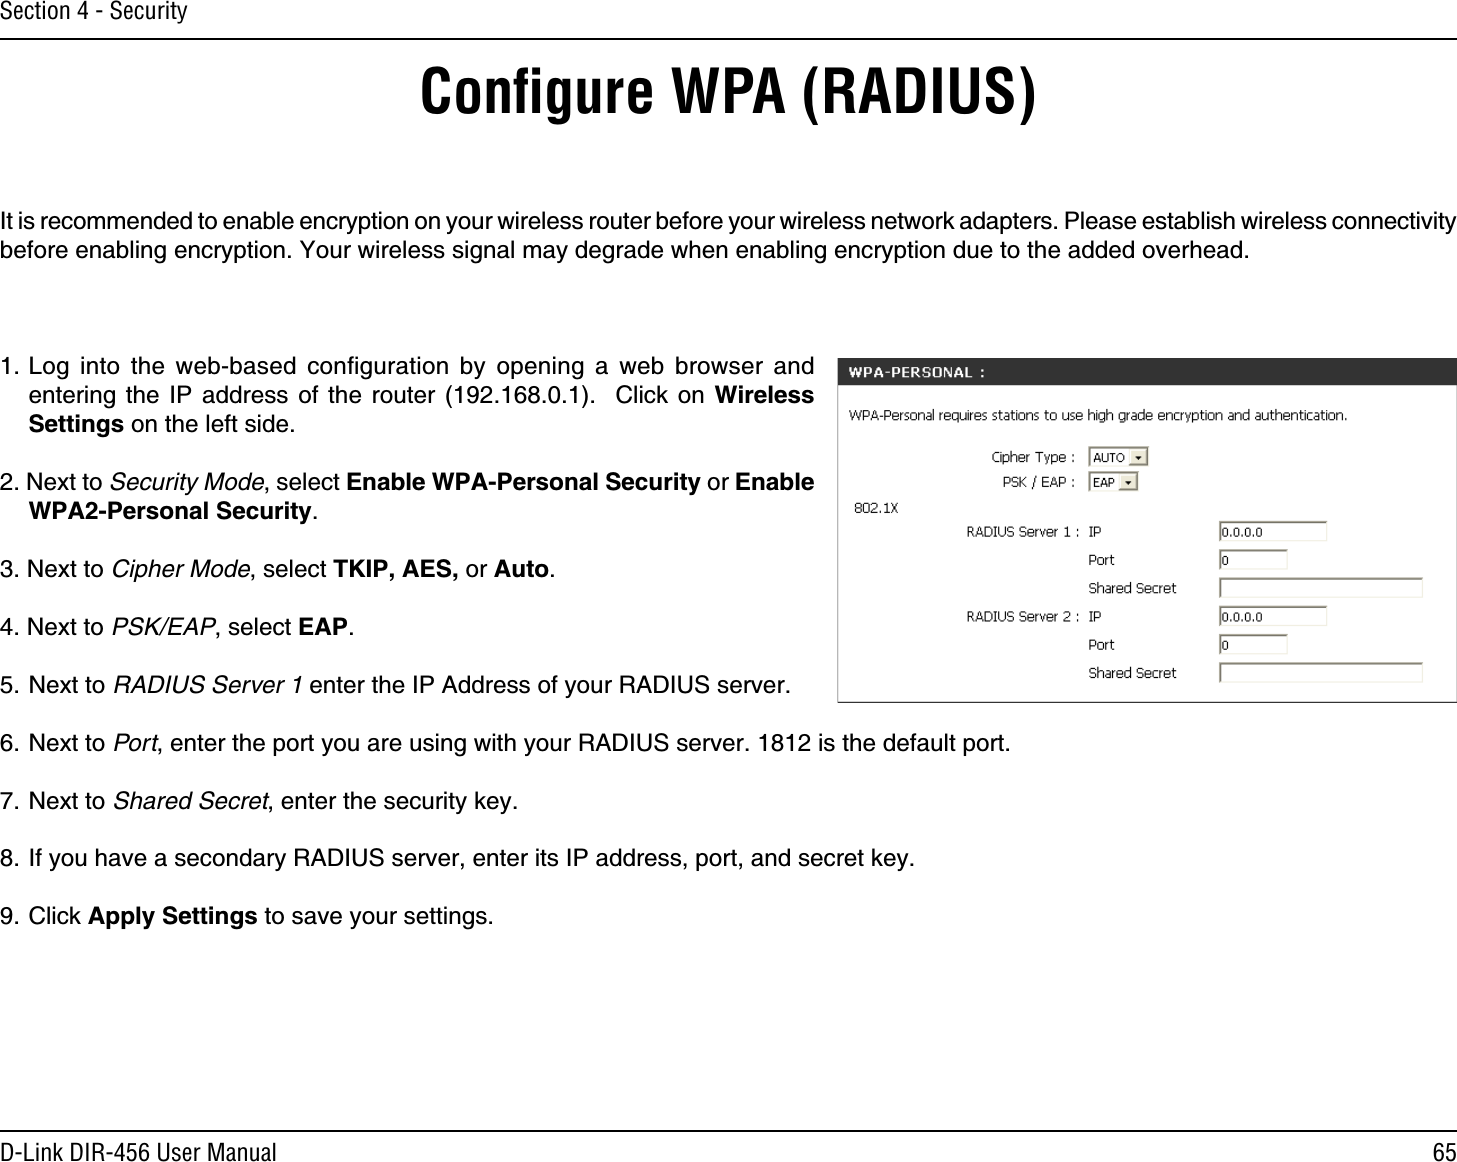 65D-Link DIR-456 User ManualSection 4 - SecurityConﬁgure WPA (RADIUS)It is recommended to enable encryption on your wireless router before your wireless network adapters. Please establish wireless connectivity before enabling encryption. Your wireless signal may degrade when enabling encryption due to the added overhead.1. Log into the web-based conﬁguration by opening a web browser and entering the IP address of the router (192.168.0.1).  Click on Wireless Settings on the left side.2. Next to Security Mode, select Enable WPA-Personal Security or Enable WPA2-Personal Security.3. Next to Cipher Mode, select TKIP, AES, or Auto.4. Next to PSK/EAP, select EAP.5. Next to RADIUS Server 1 enter the IP Address of your RADIUS server.6. Next to Port, enter the port you are using with your RADIUS server. 1812 is the default port.7. Next to Shared Secret, enter the security key.8. If you have a secondary RADIUS server, enter its IP address, port, and secret key.9. Click Apply Settings to save your settings.